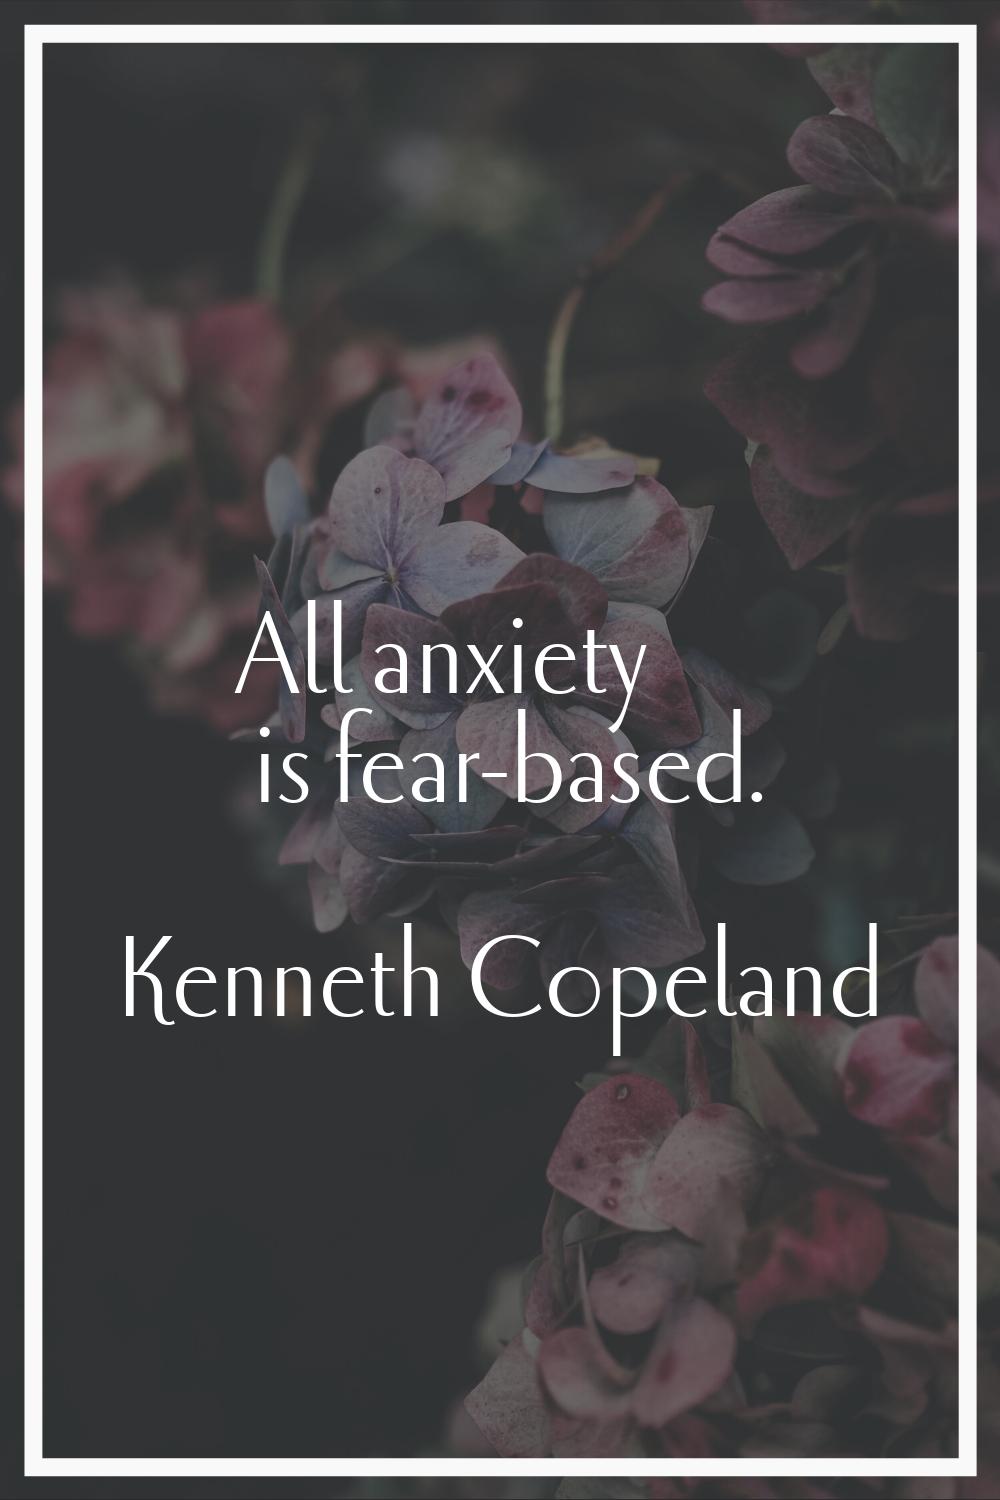 All anxiety is fear-based.